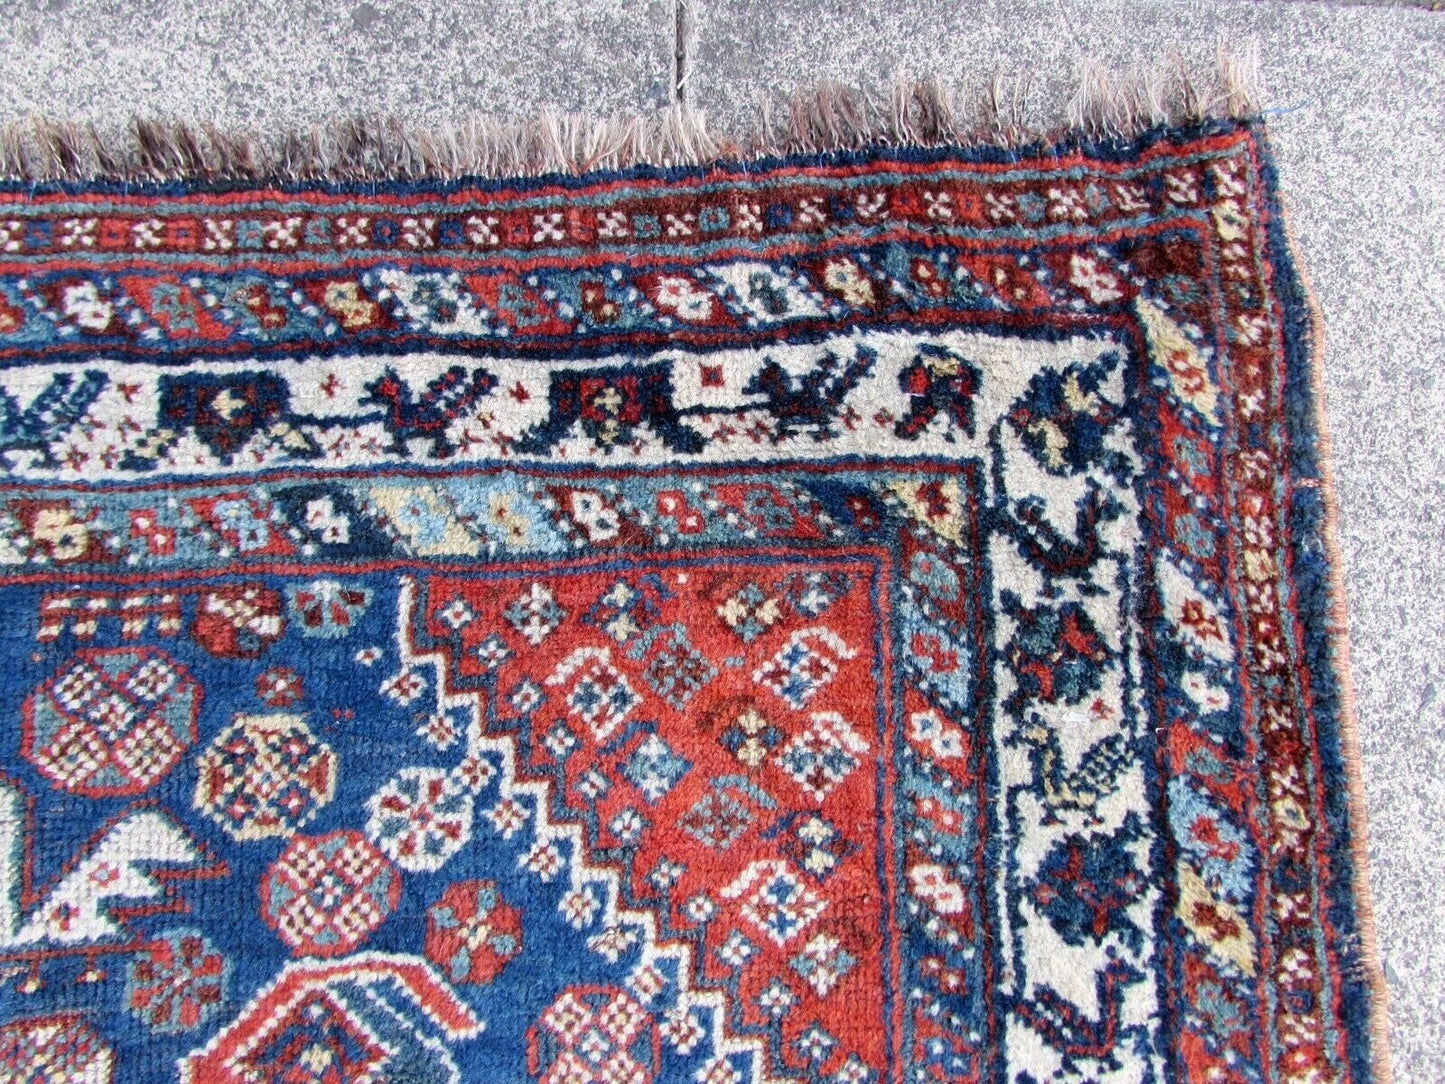 Close-up of intricate knotting technique used in traditional Persian rug